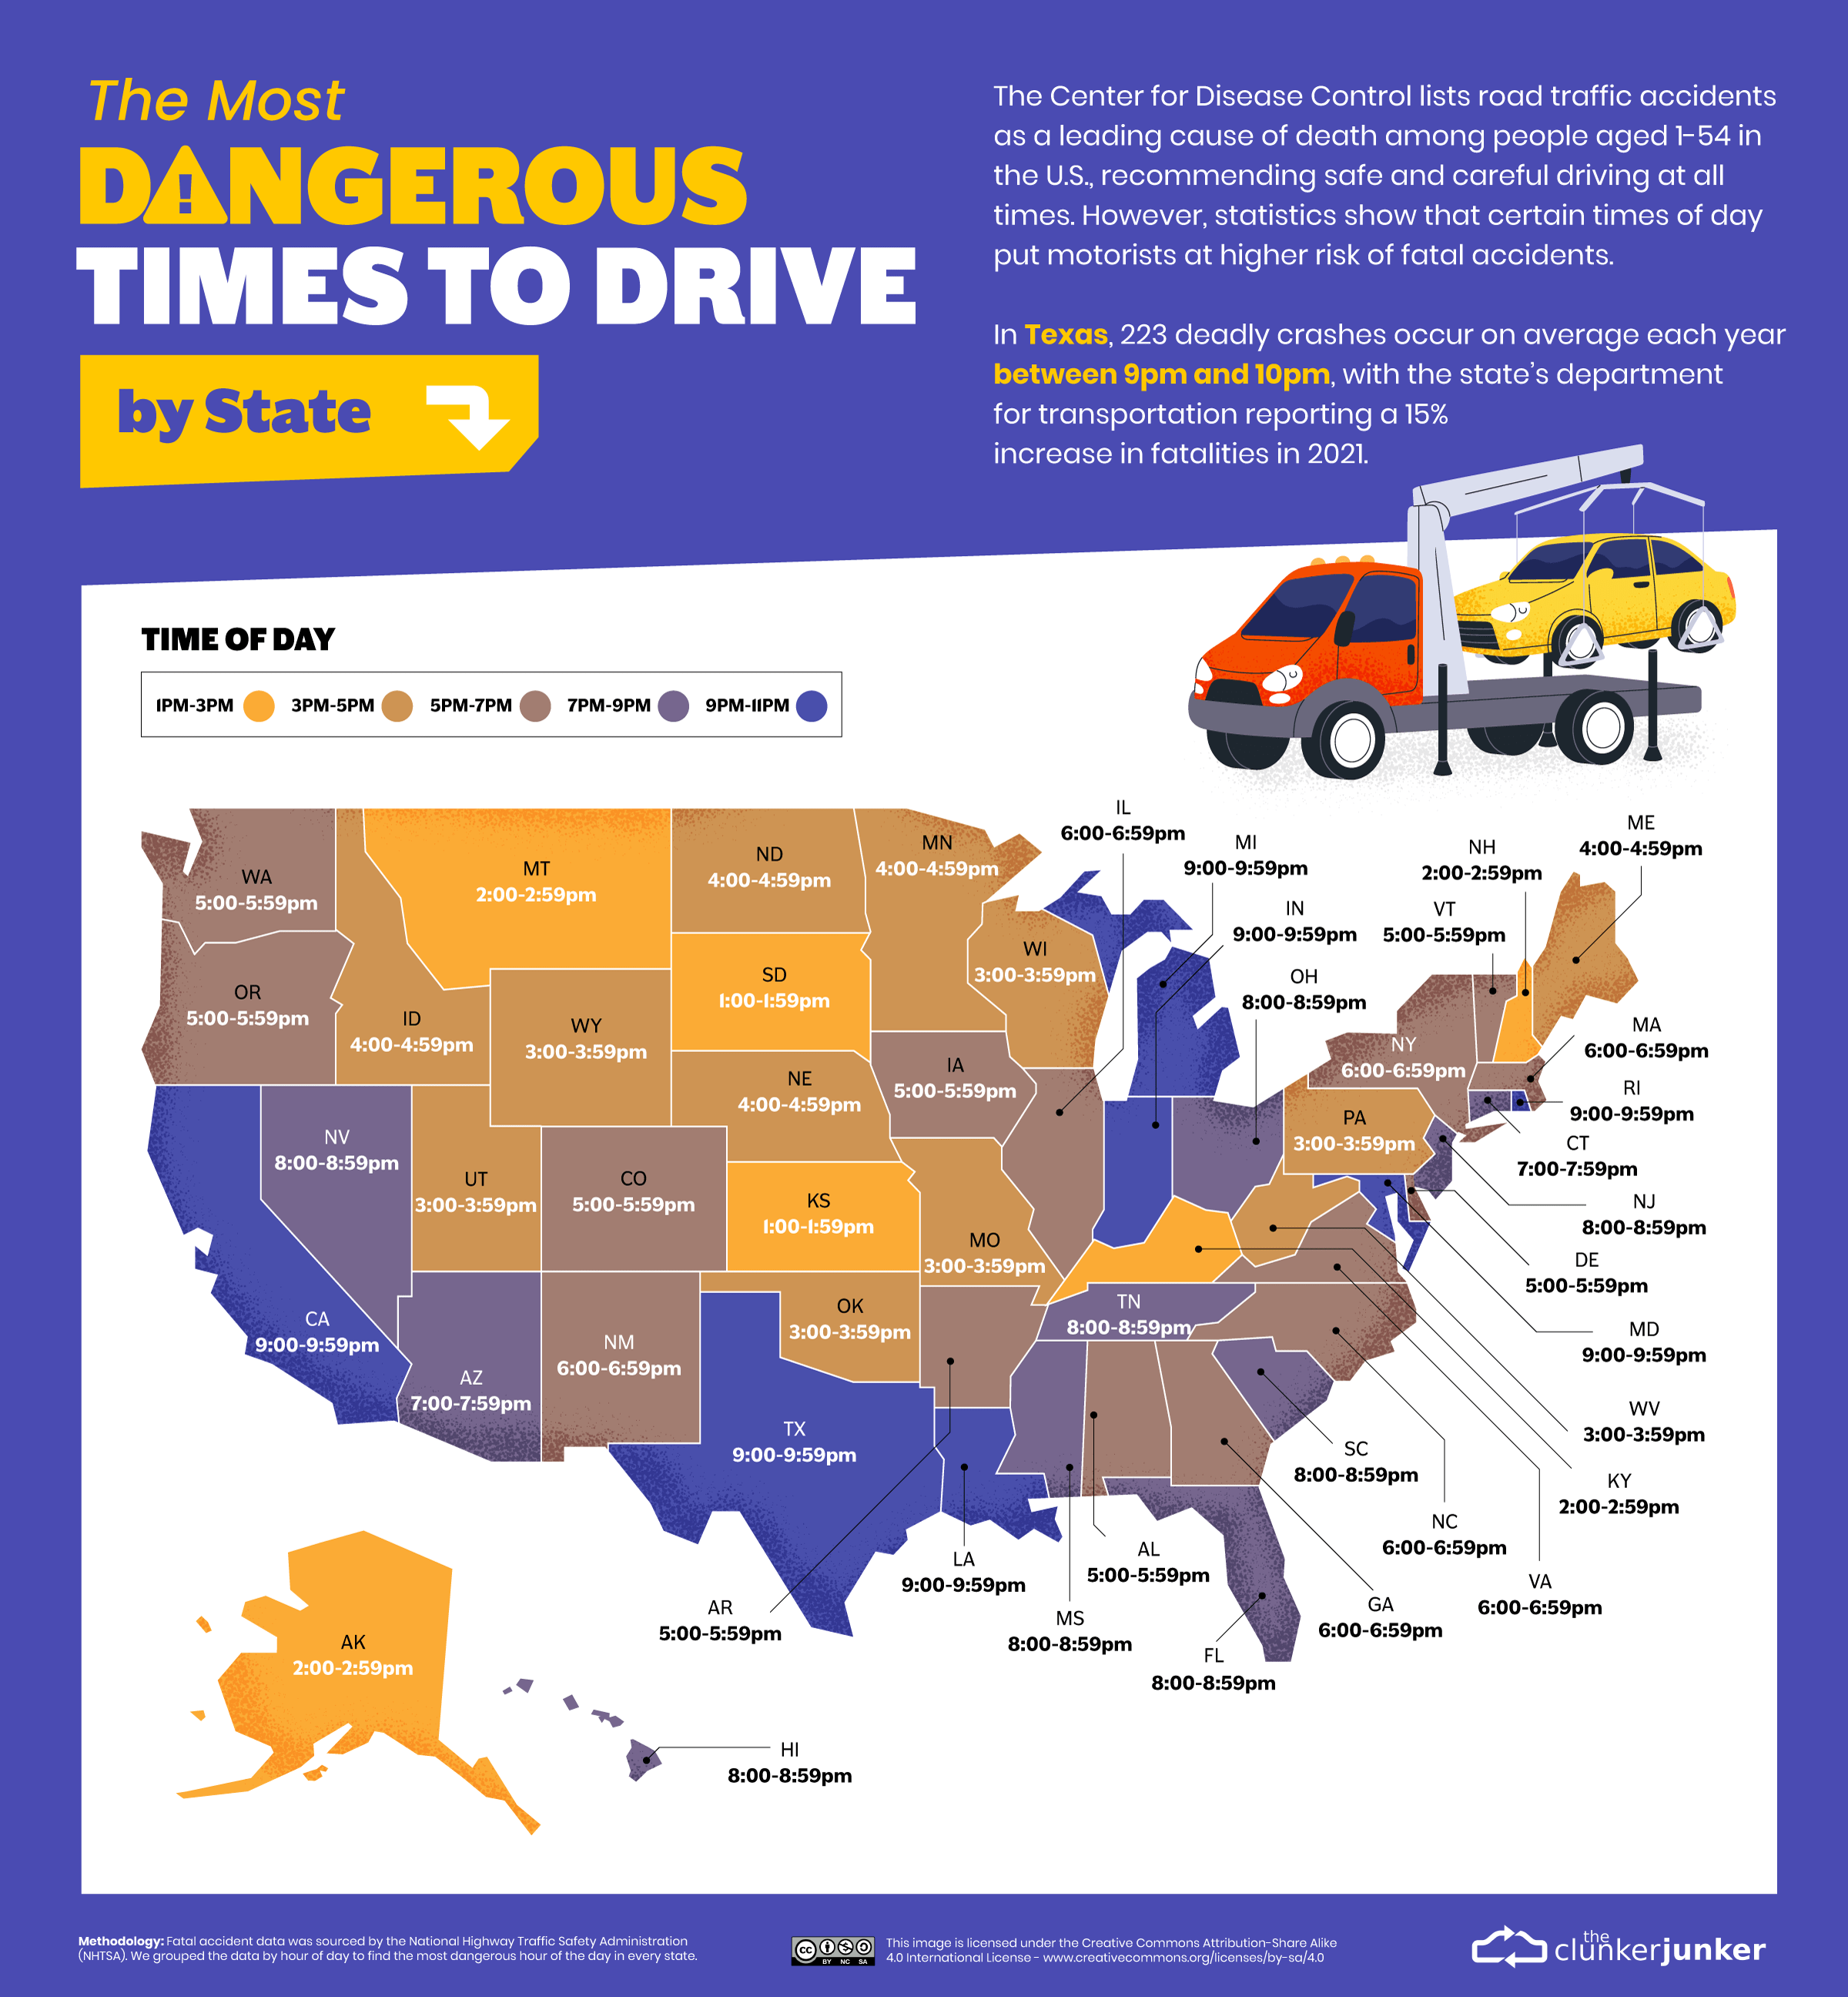 Map of the most dangerous time to drive in the U.S. by state